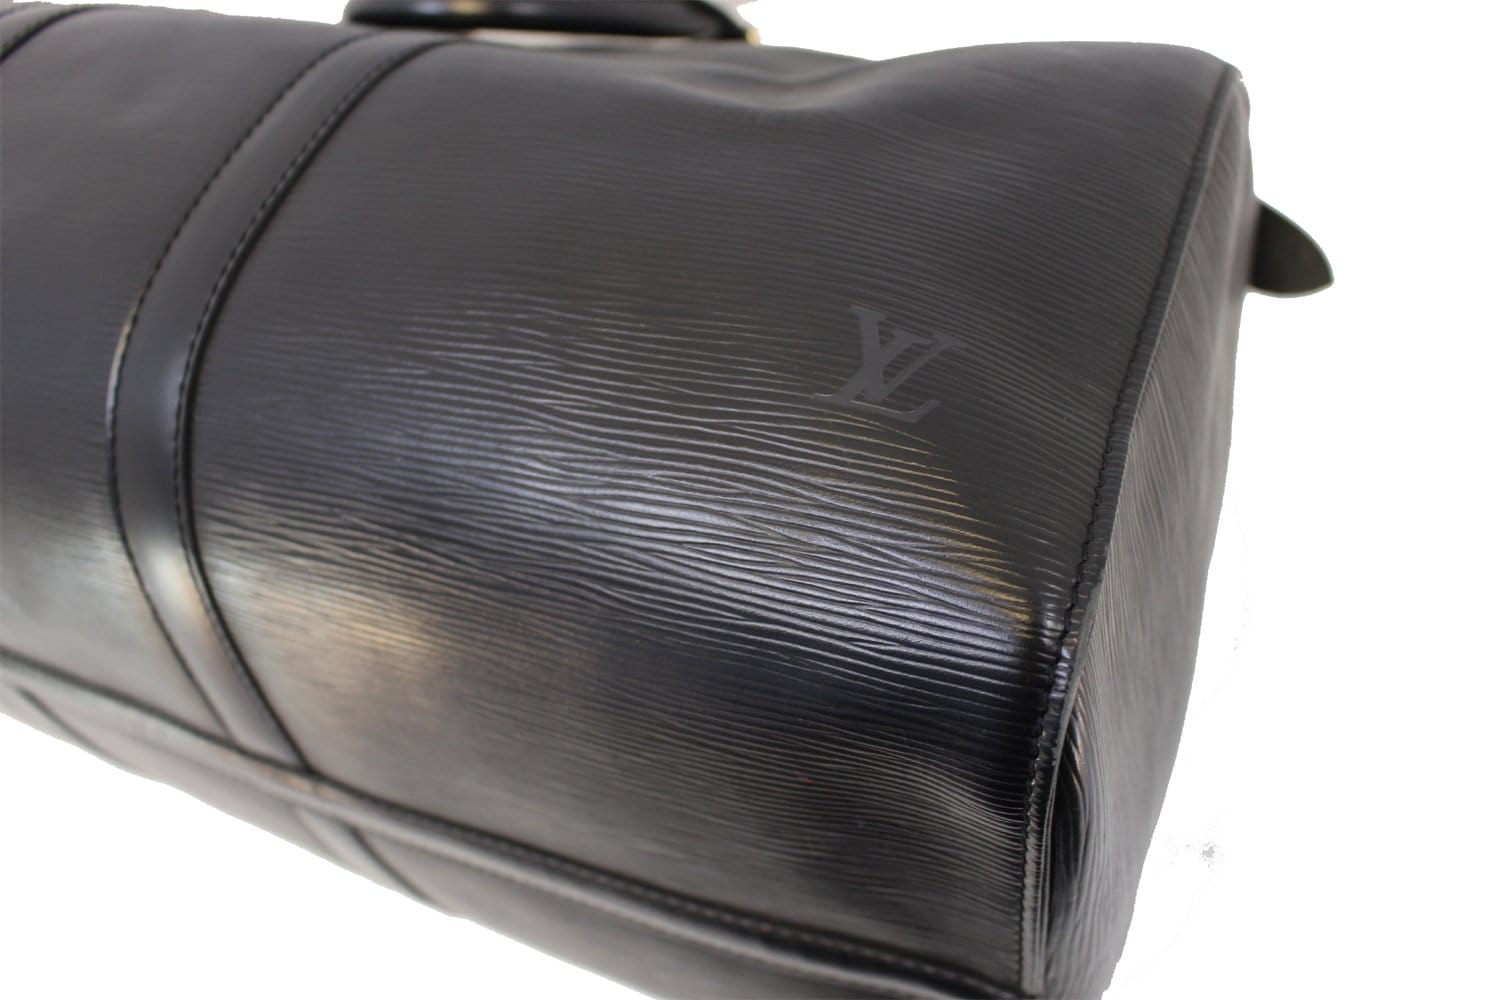 Louis Vuitton Limited Edition Black Epi Leather FIFA World Cup Keepall  Bandouliere 50 Bag - Yoogi's Closet